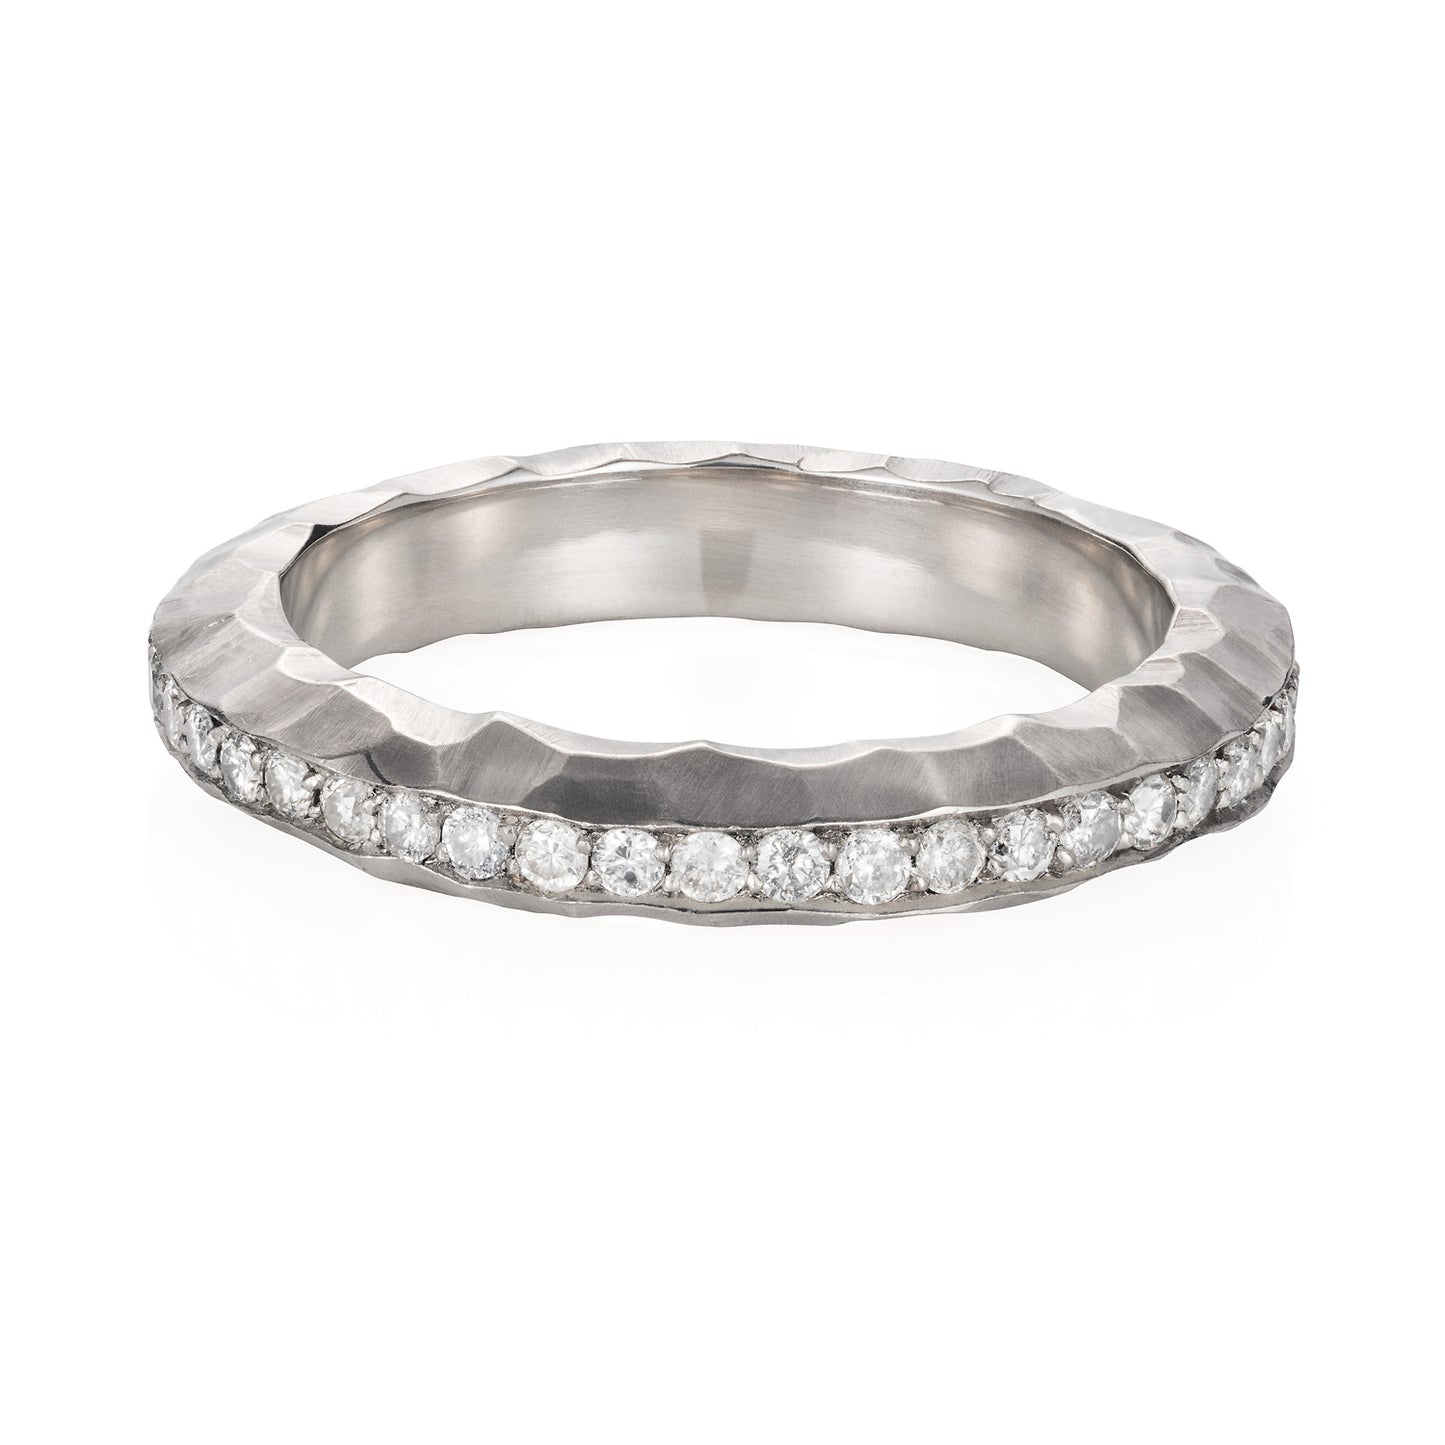 Sweet Pea 18ct white gold chunky hammered diamond eternity band ring with pave set grey diamonds